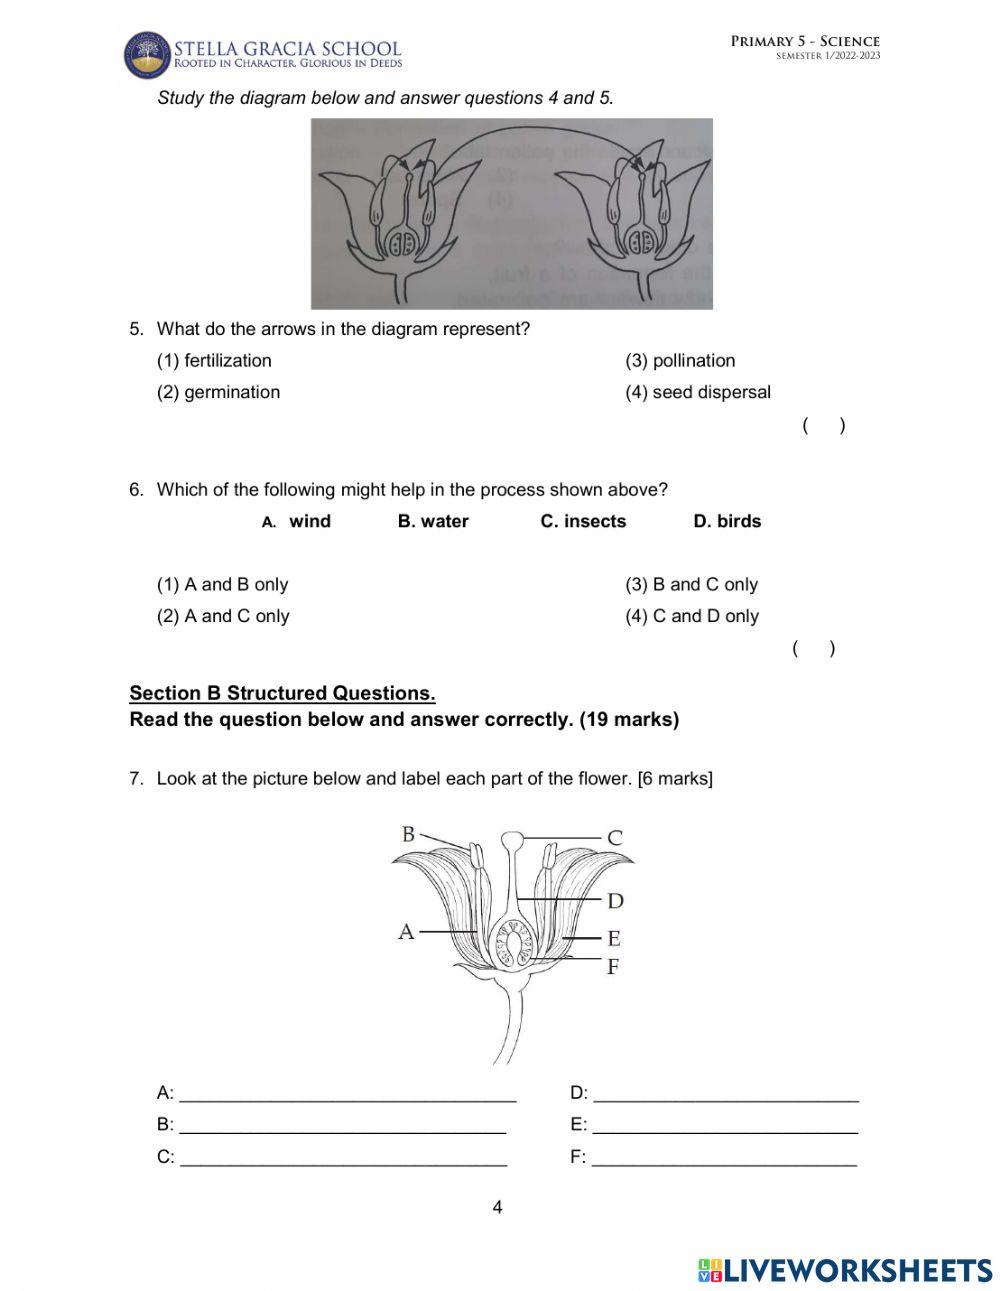 P5-Topical Test 1